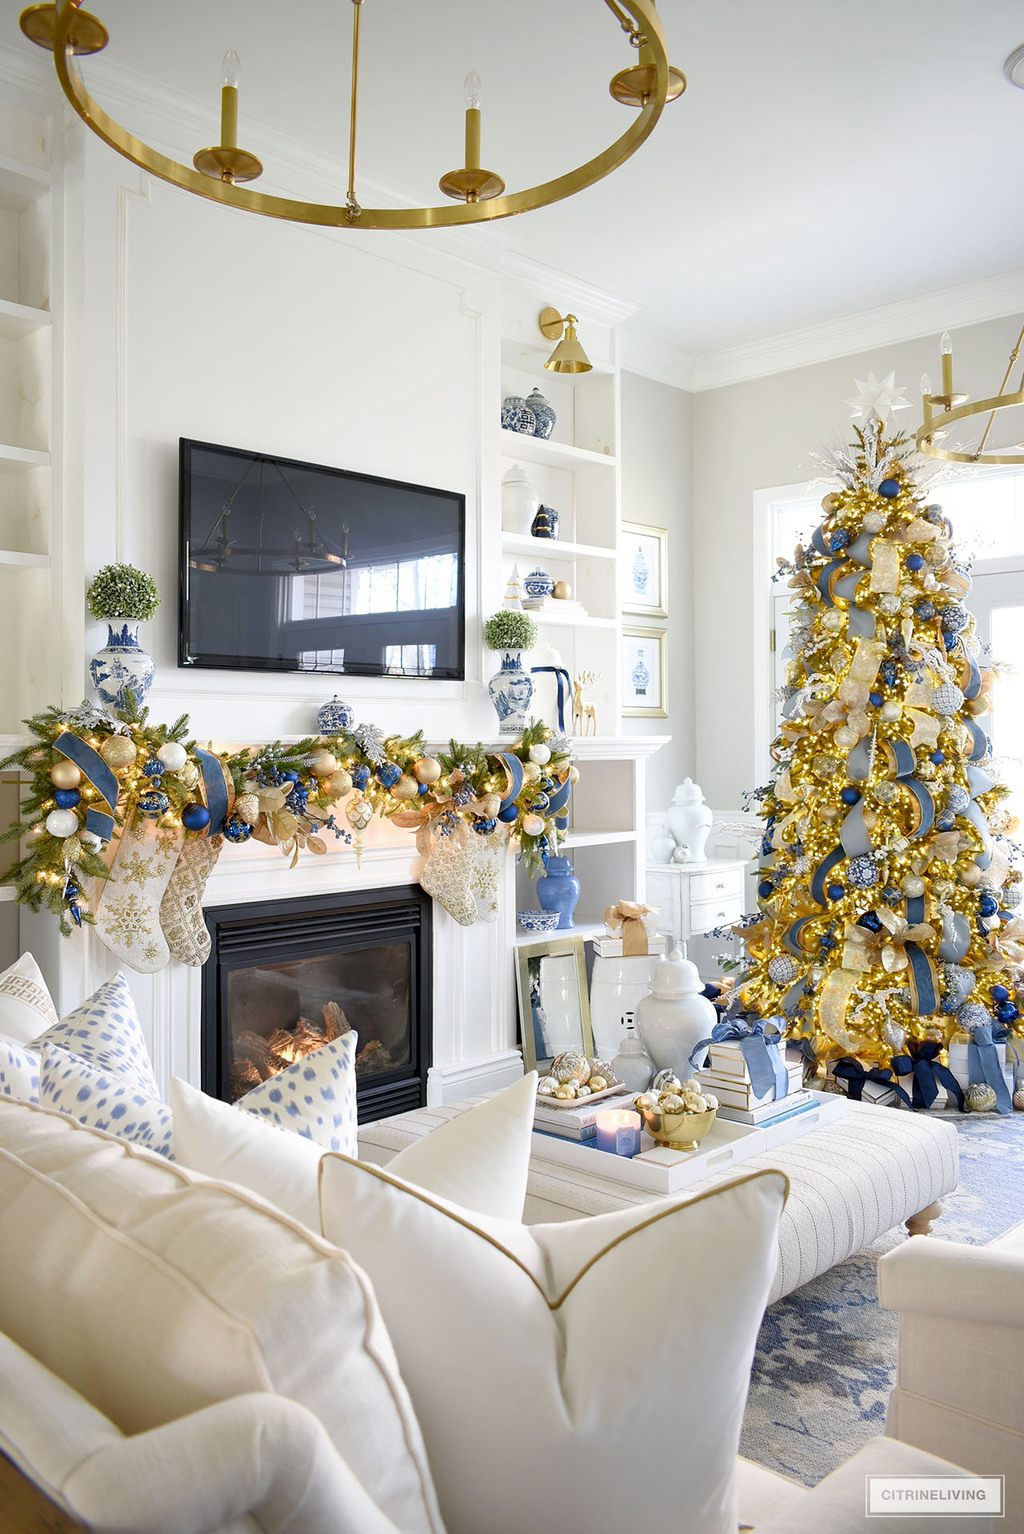 Gorgeous Christmas living room with blue and gold decorated tree and garland, blue, white and gold Christmas decor on bookshelves and ottoman.